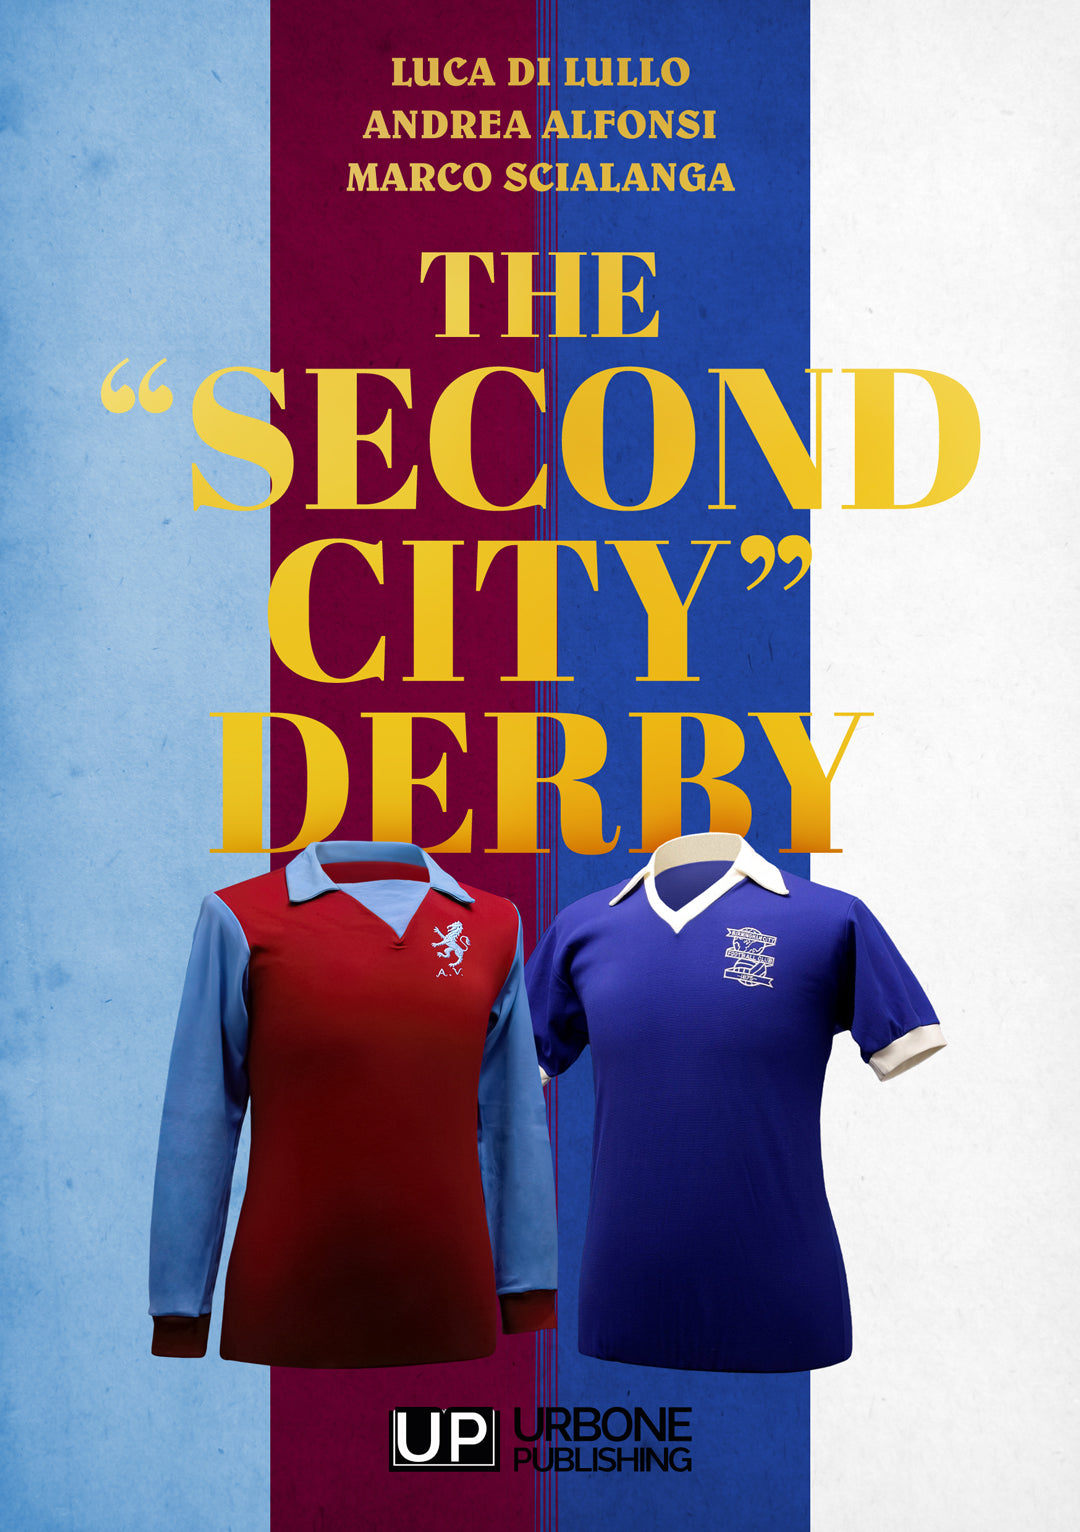 THE SECOND CITY DERBY